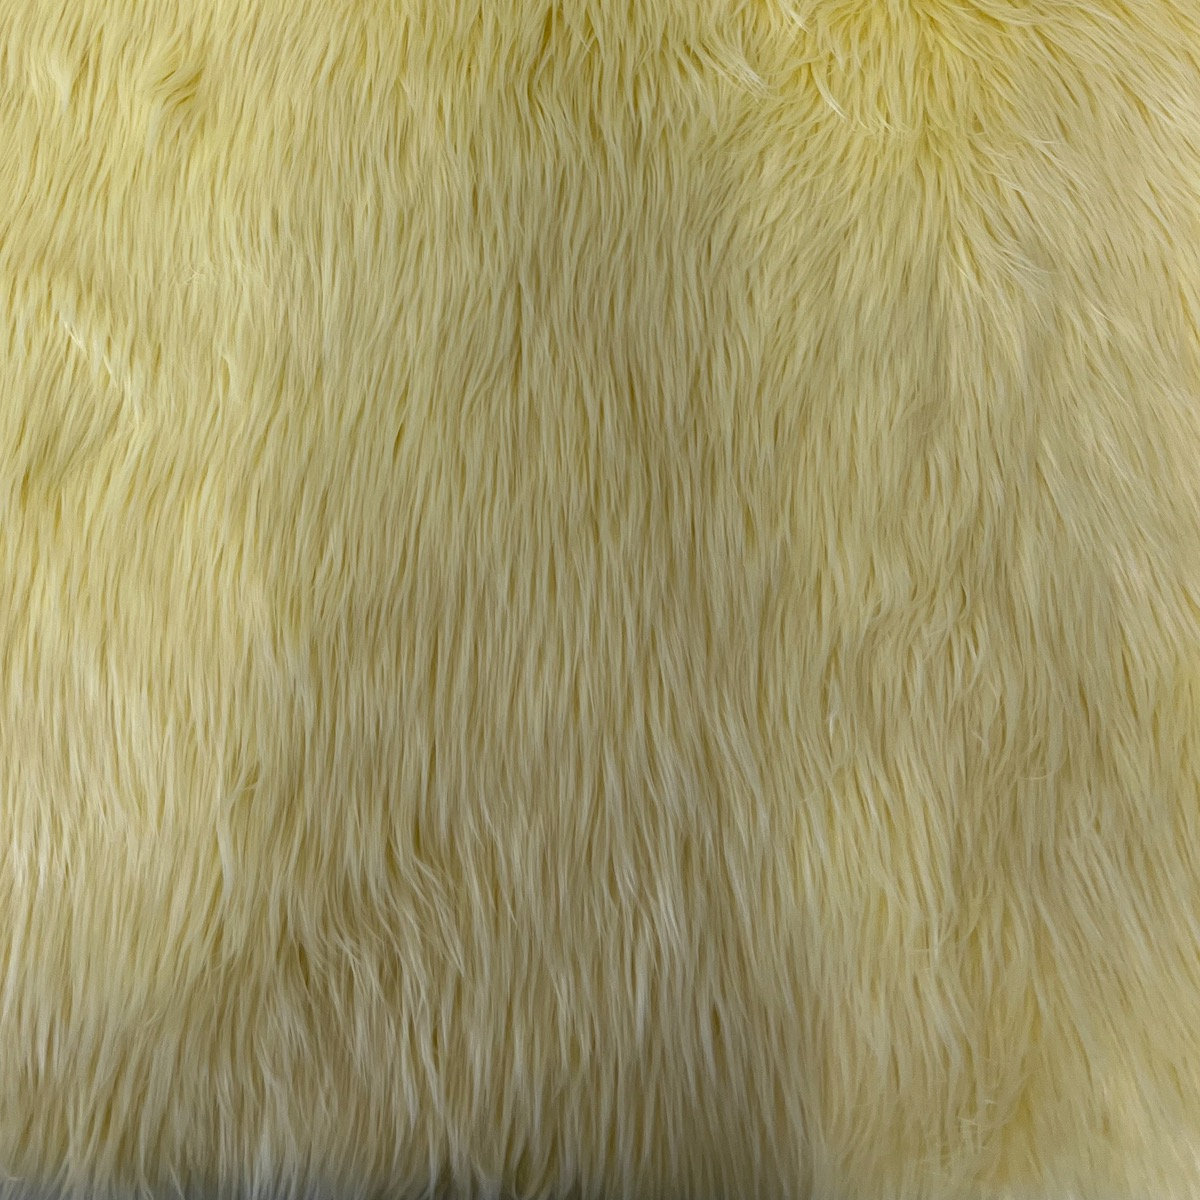 Shaggy Faux Fur Fabric by The Yard, Craft Furry Fabric for Sewing Apparel,  Rugs, Pillows, and More Faux Fluffy Fabric 50cm x 180cm (Color : Pink)